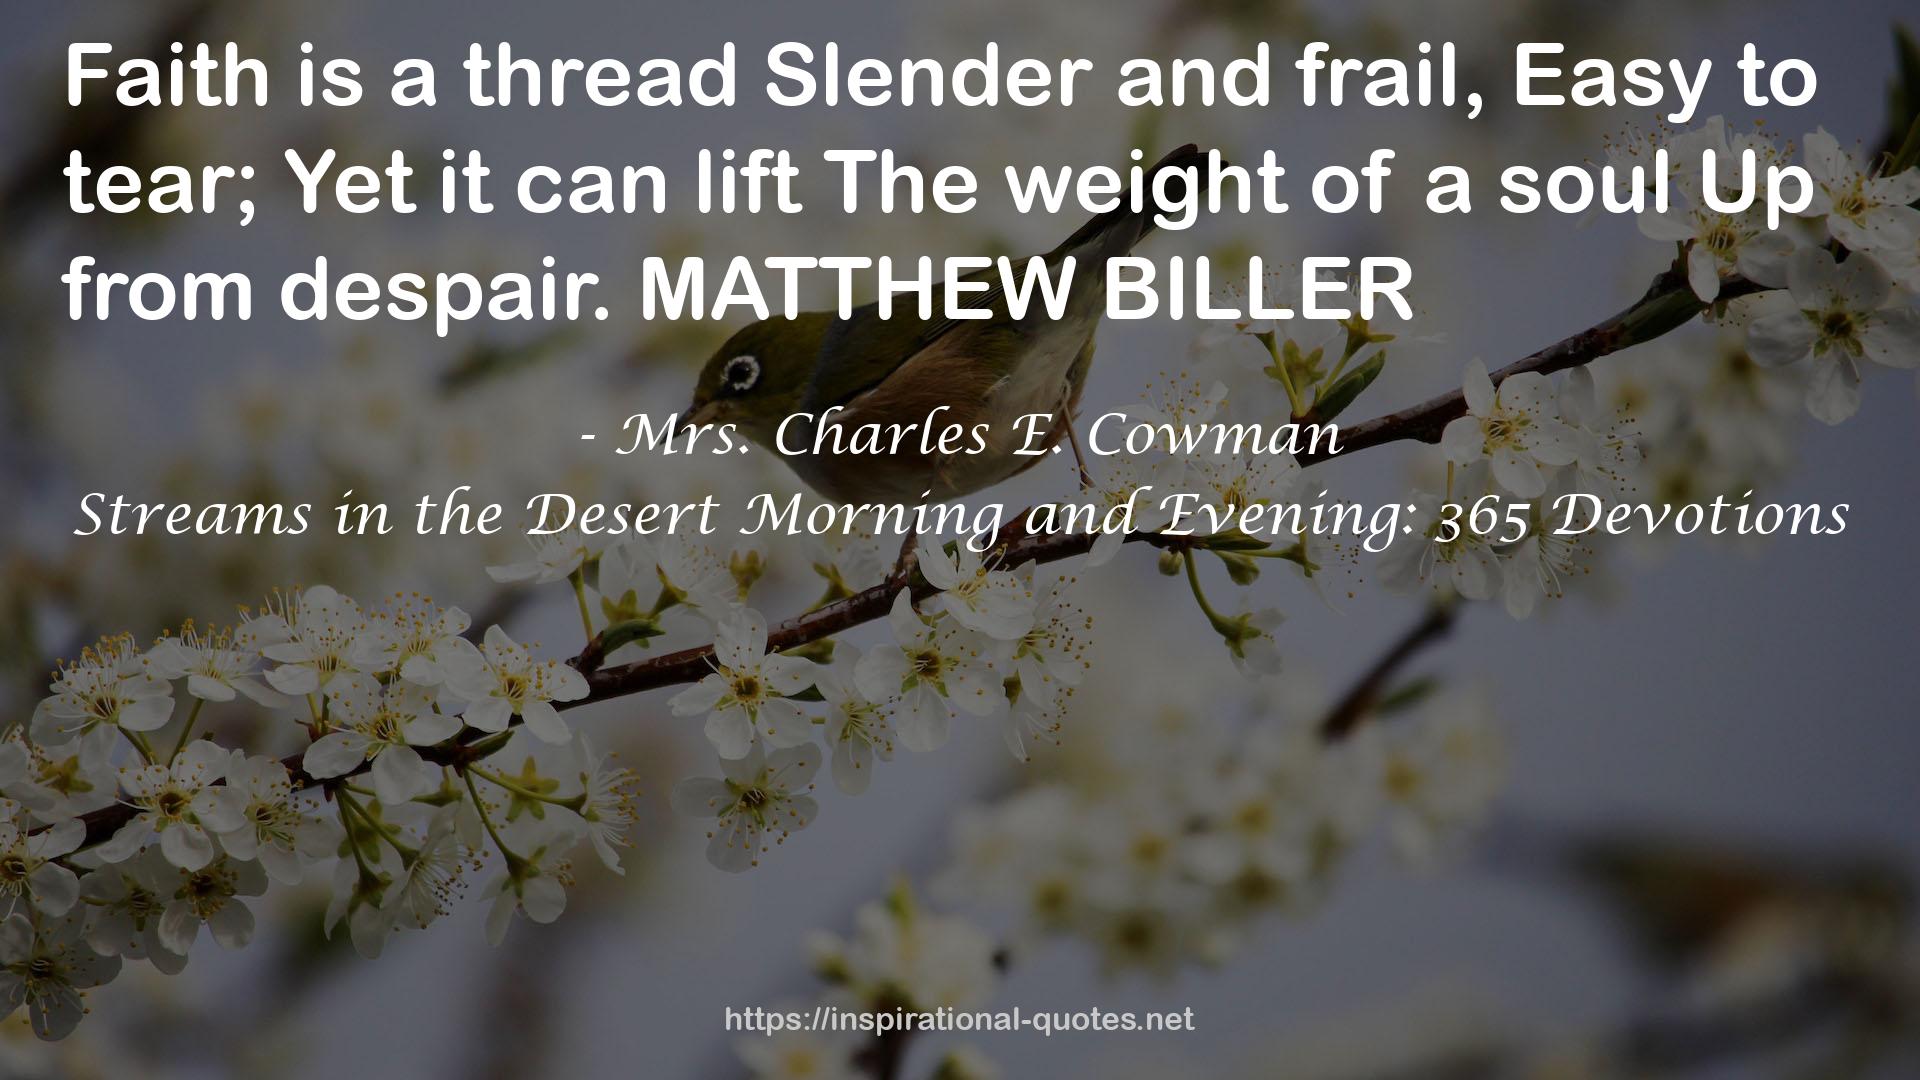 Streams in the Desert Morning and Evening: 365 Devotions QUOTES